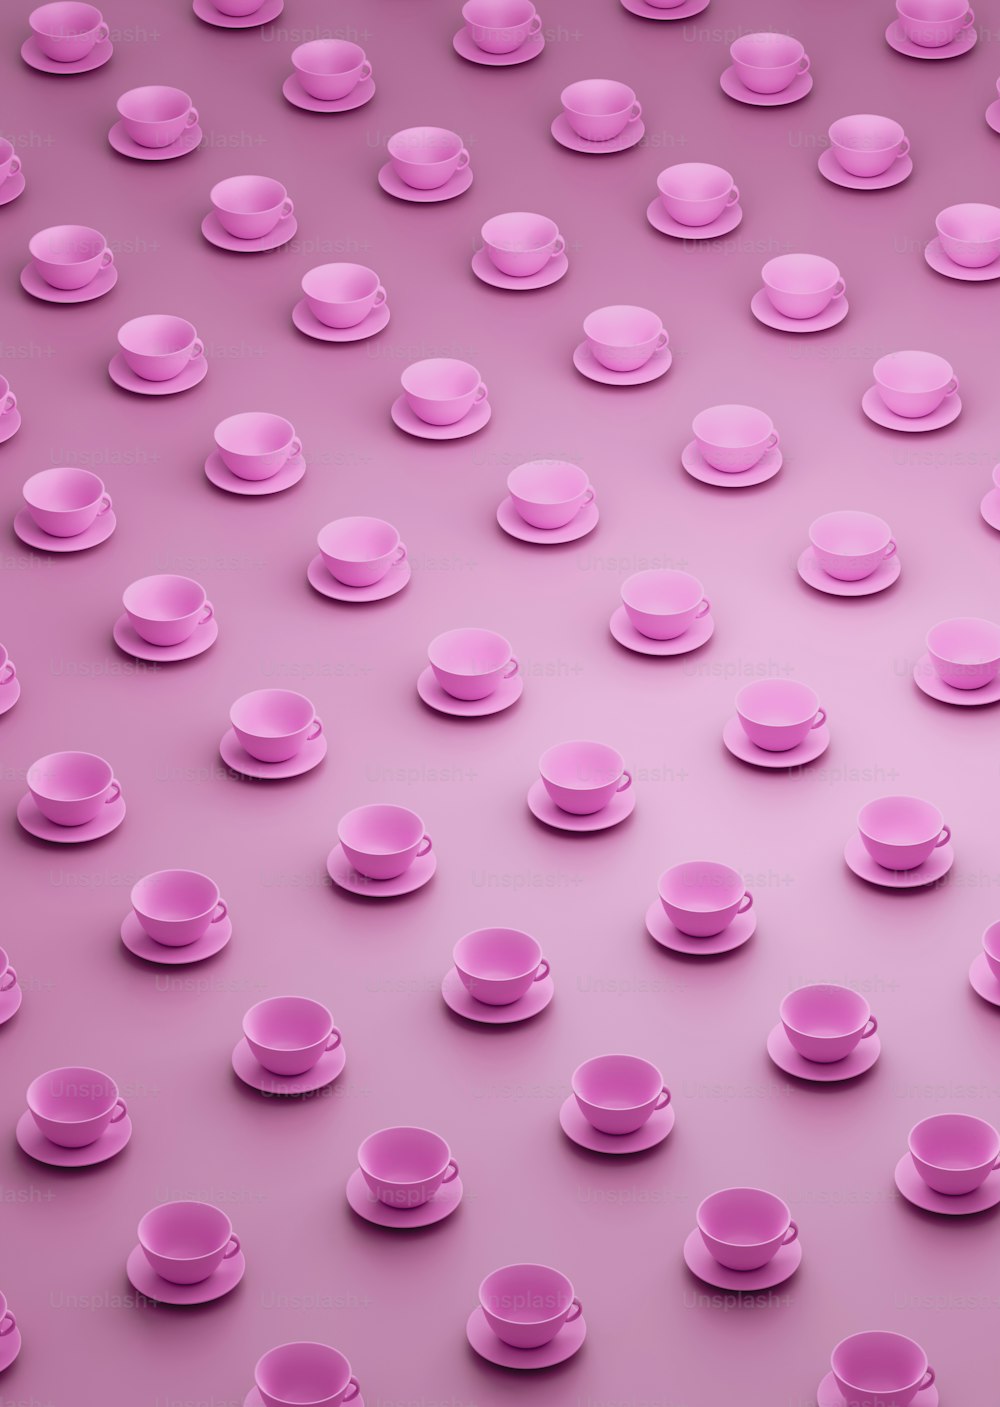 a group of pink cups and saucers on a pink background